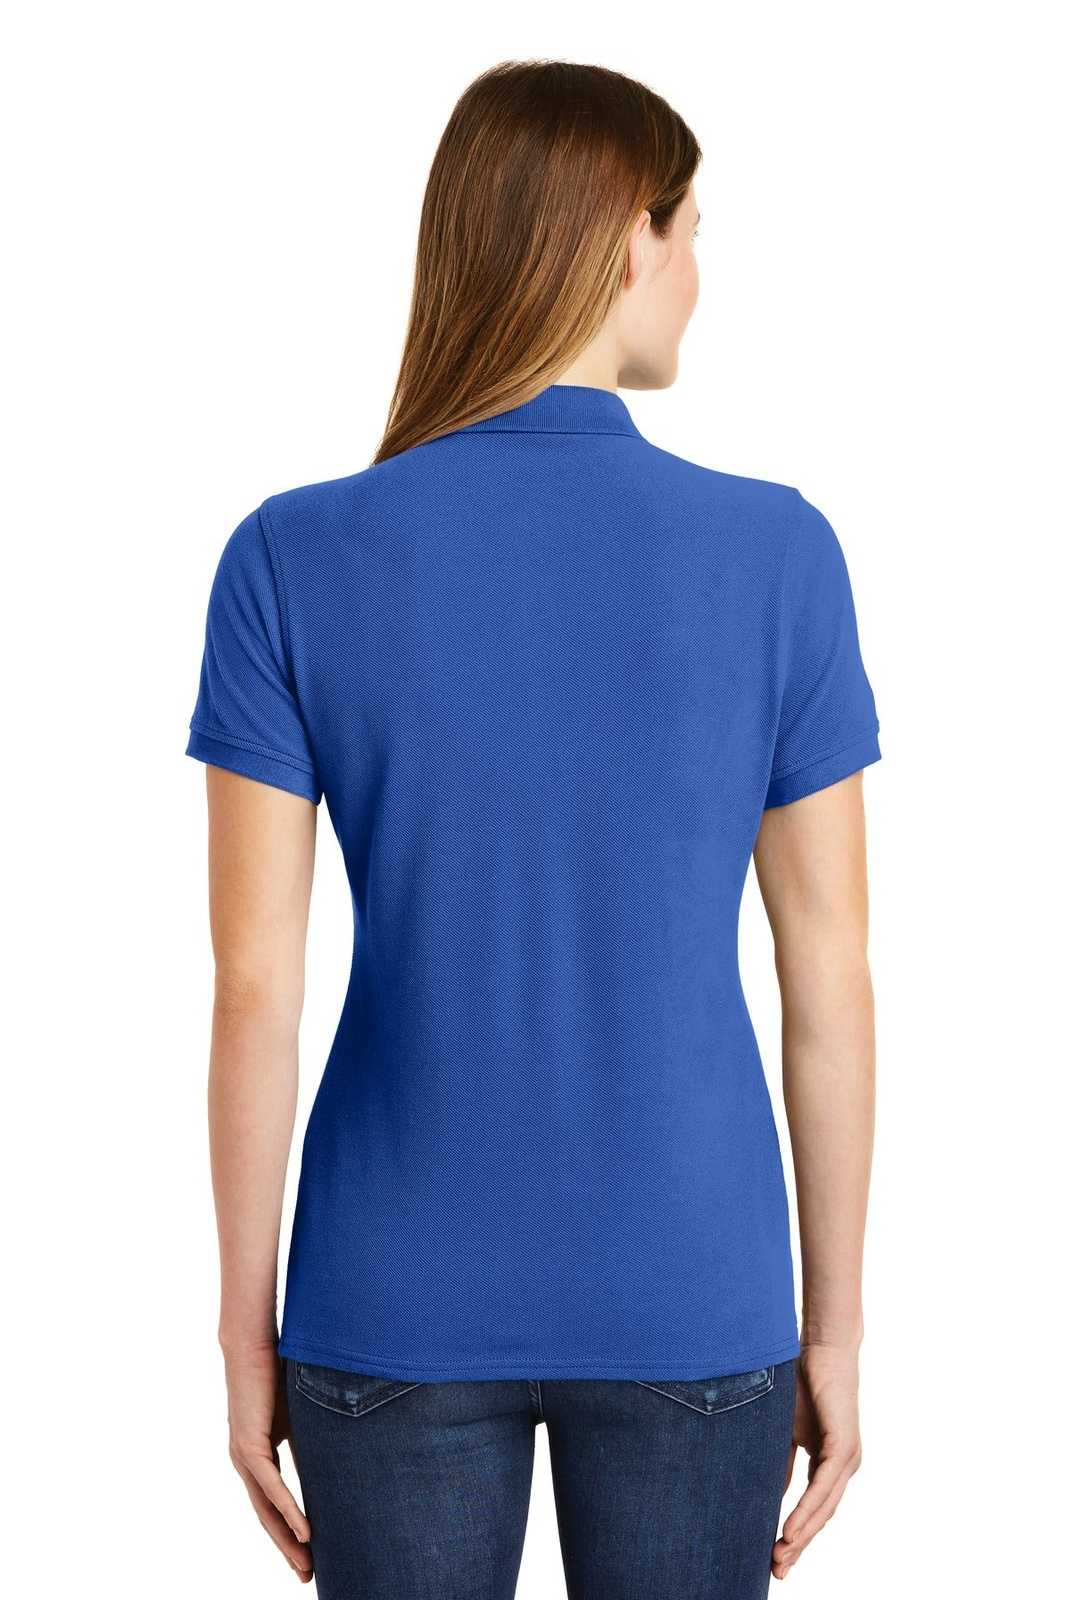 Port & Company LKP1500 Ladies Combed Ring Spun Pique Polo - Royal - HIT a Double - 1